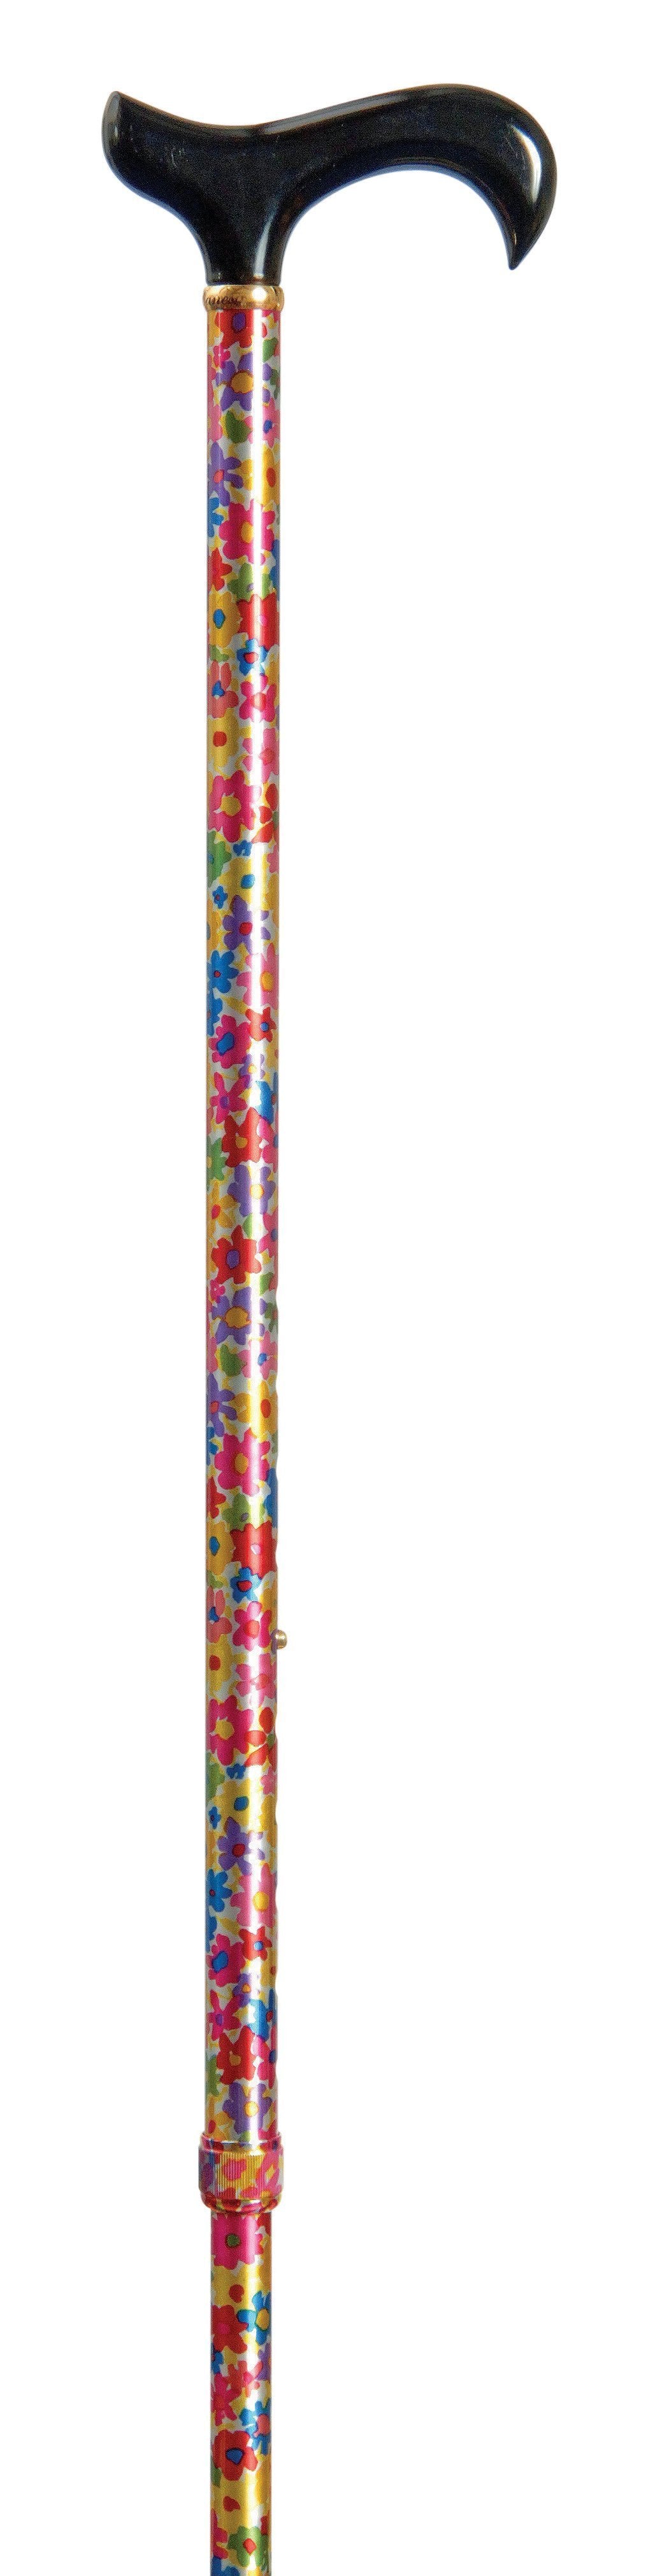 Classic Canes Value Derby, Happy Flowers, adj. 76-99cm (30-39